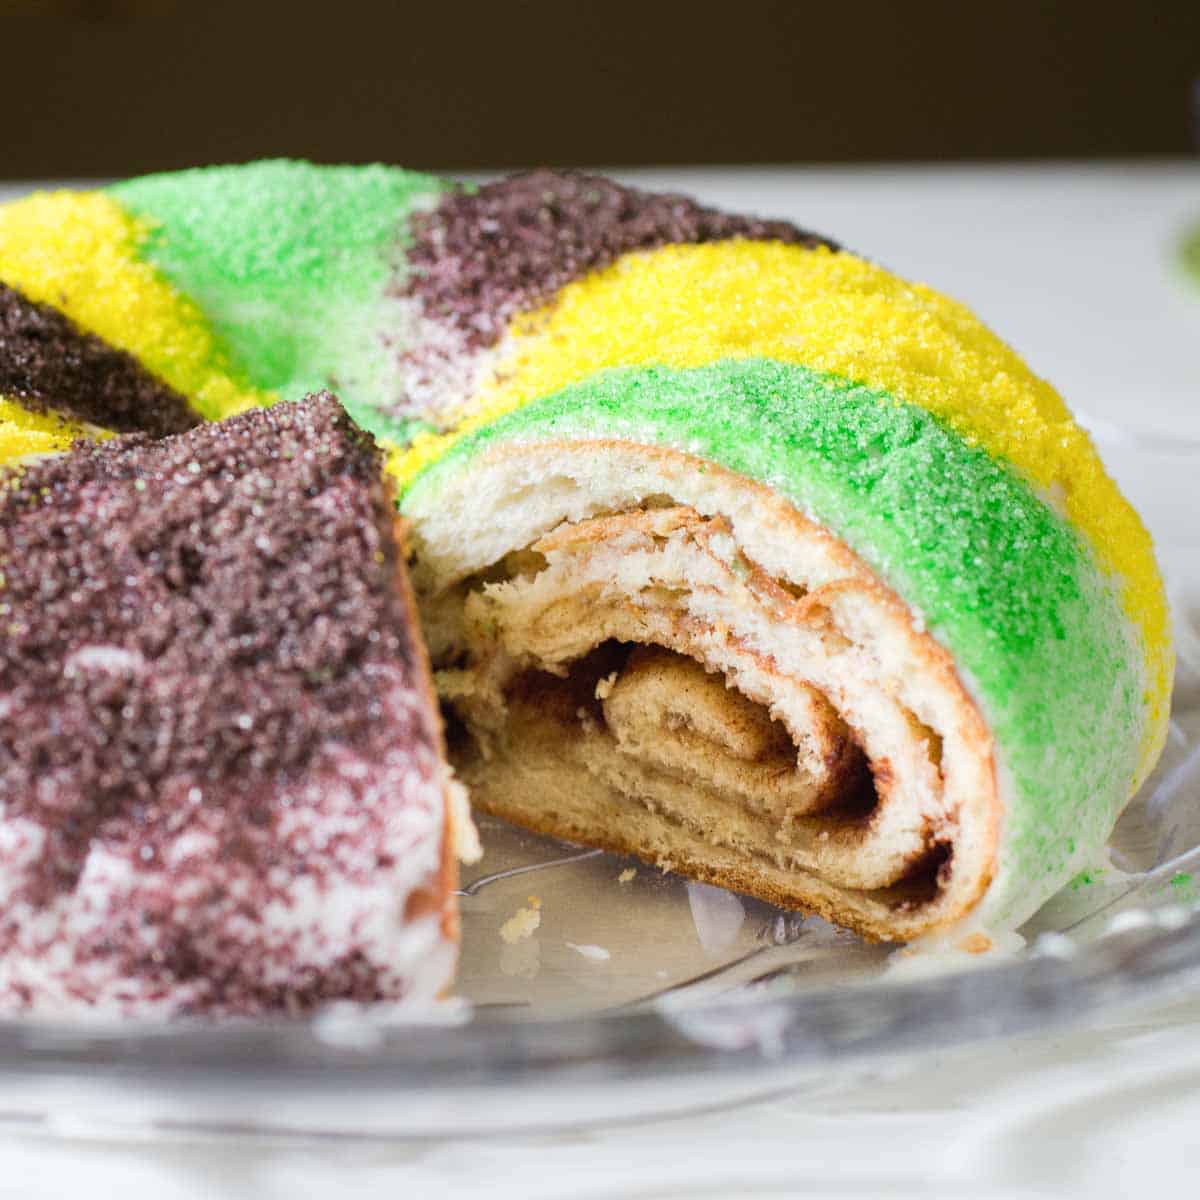 England Oaks Active Adult Community  History of the King CakeThe King Cake  is believed to have originated around the 12th century The early Europeans  celebrated the coming of the three wise